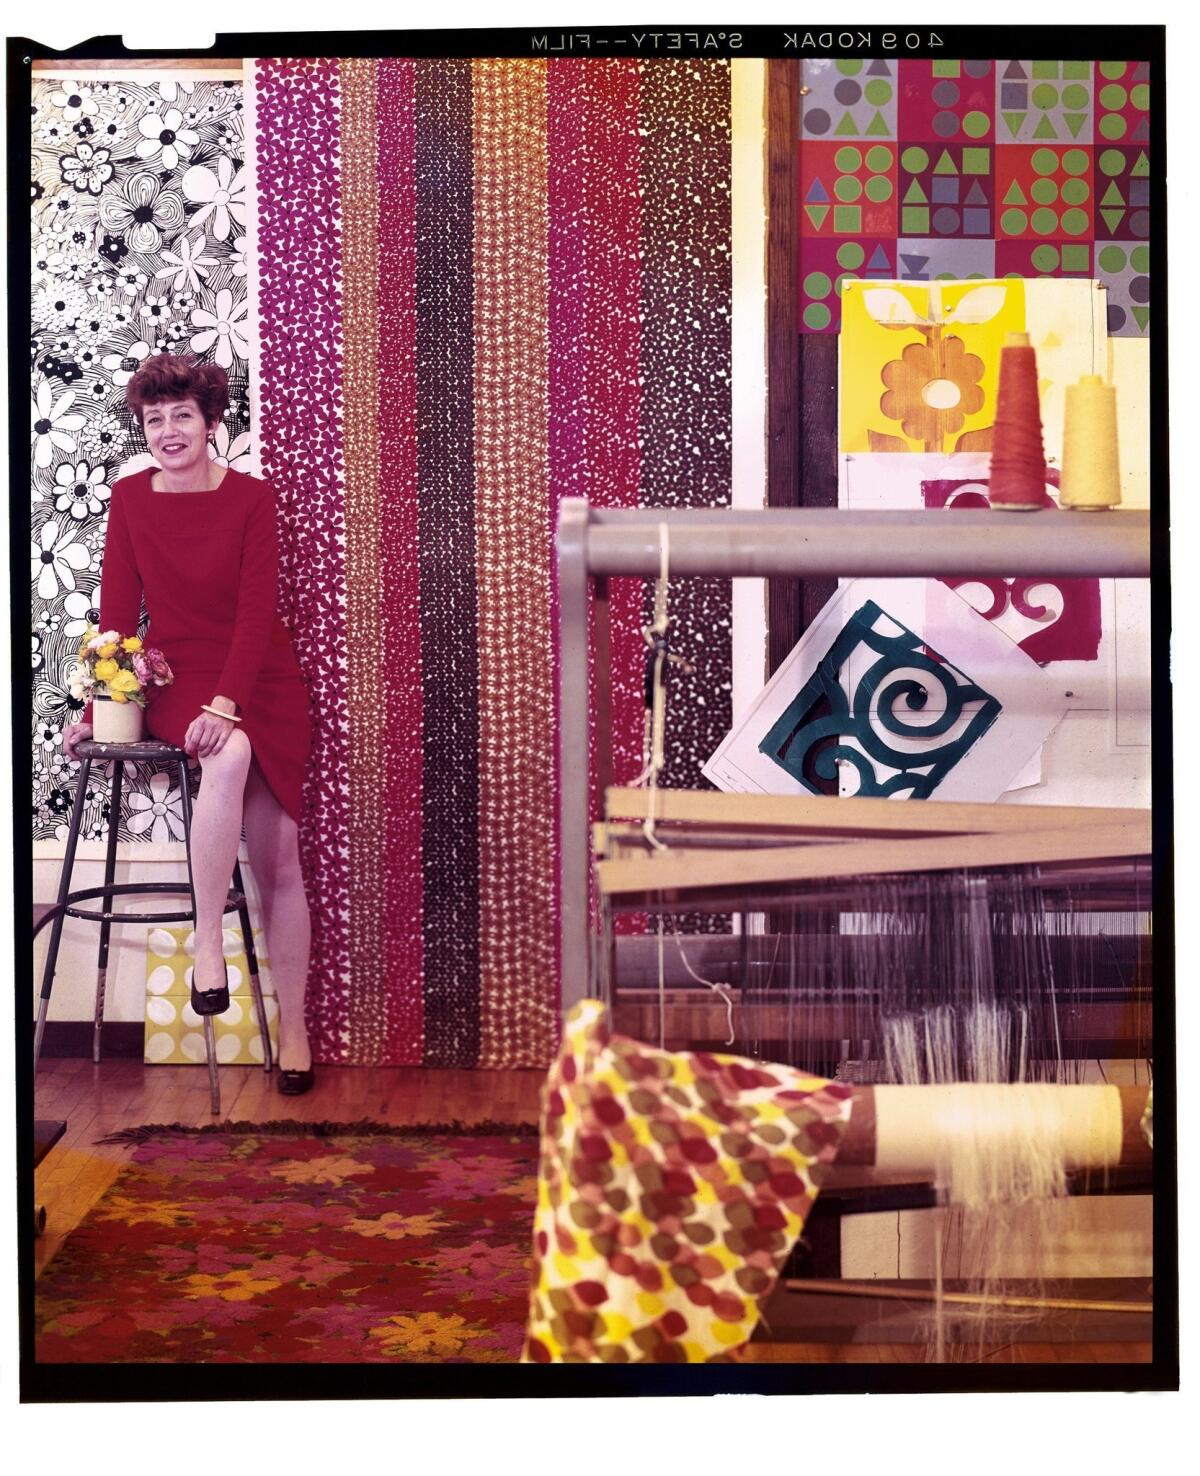 In a photo taken for the Los Angeles Times Home magazine in 1967, Gere Kavanaugh is surrounded by her colorful fabric designs.